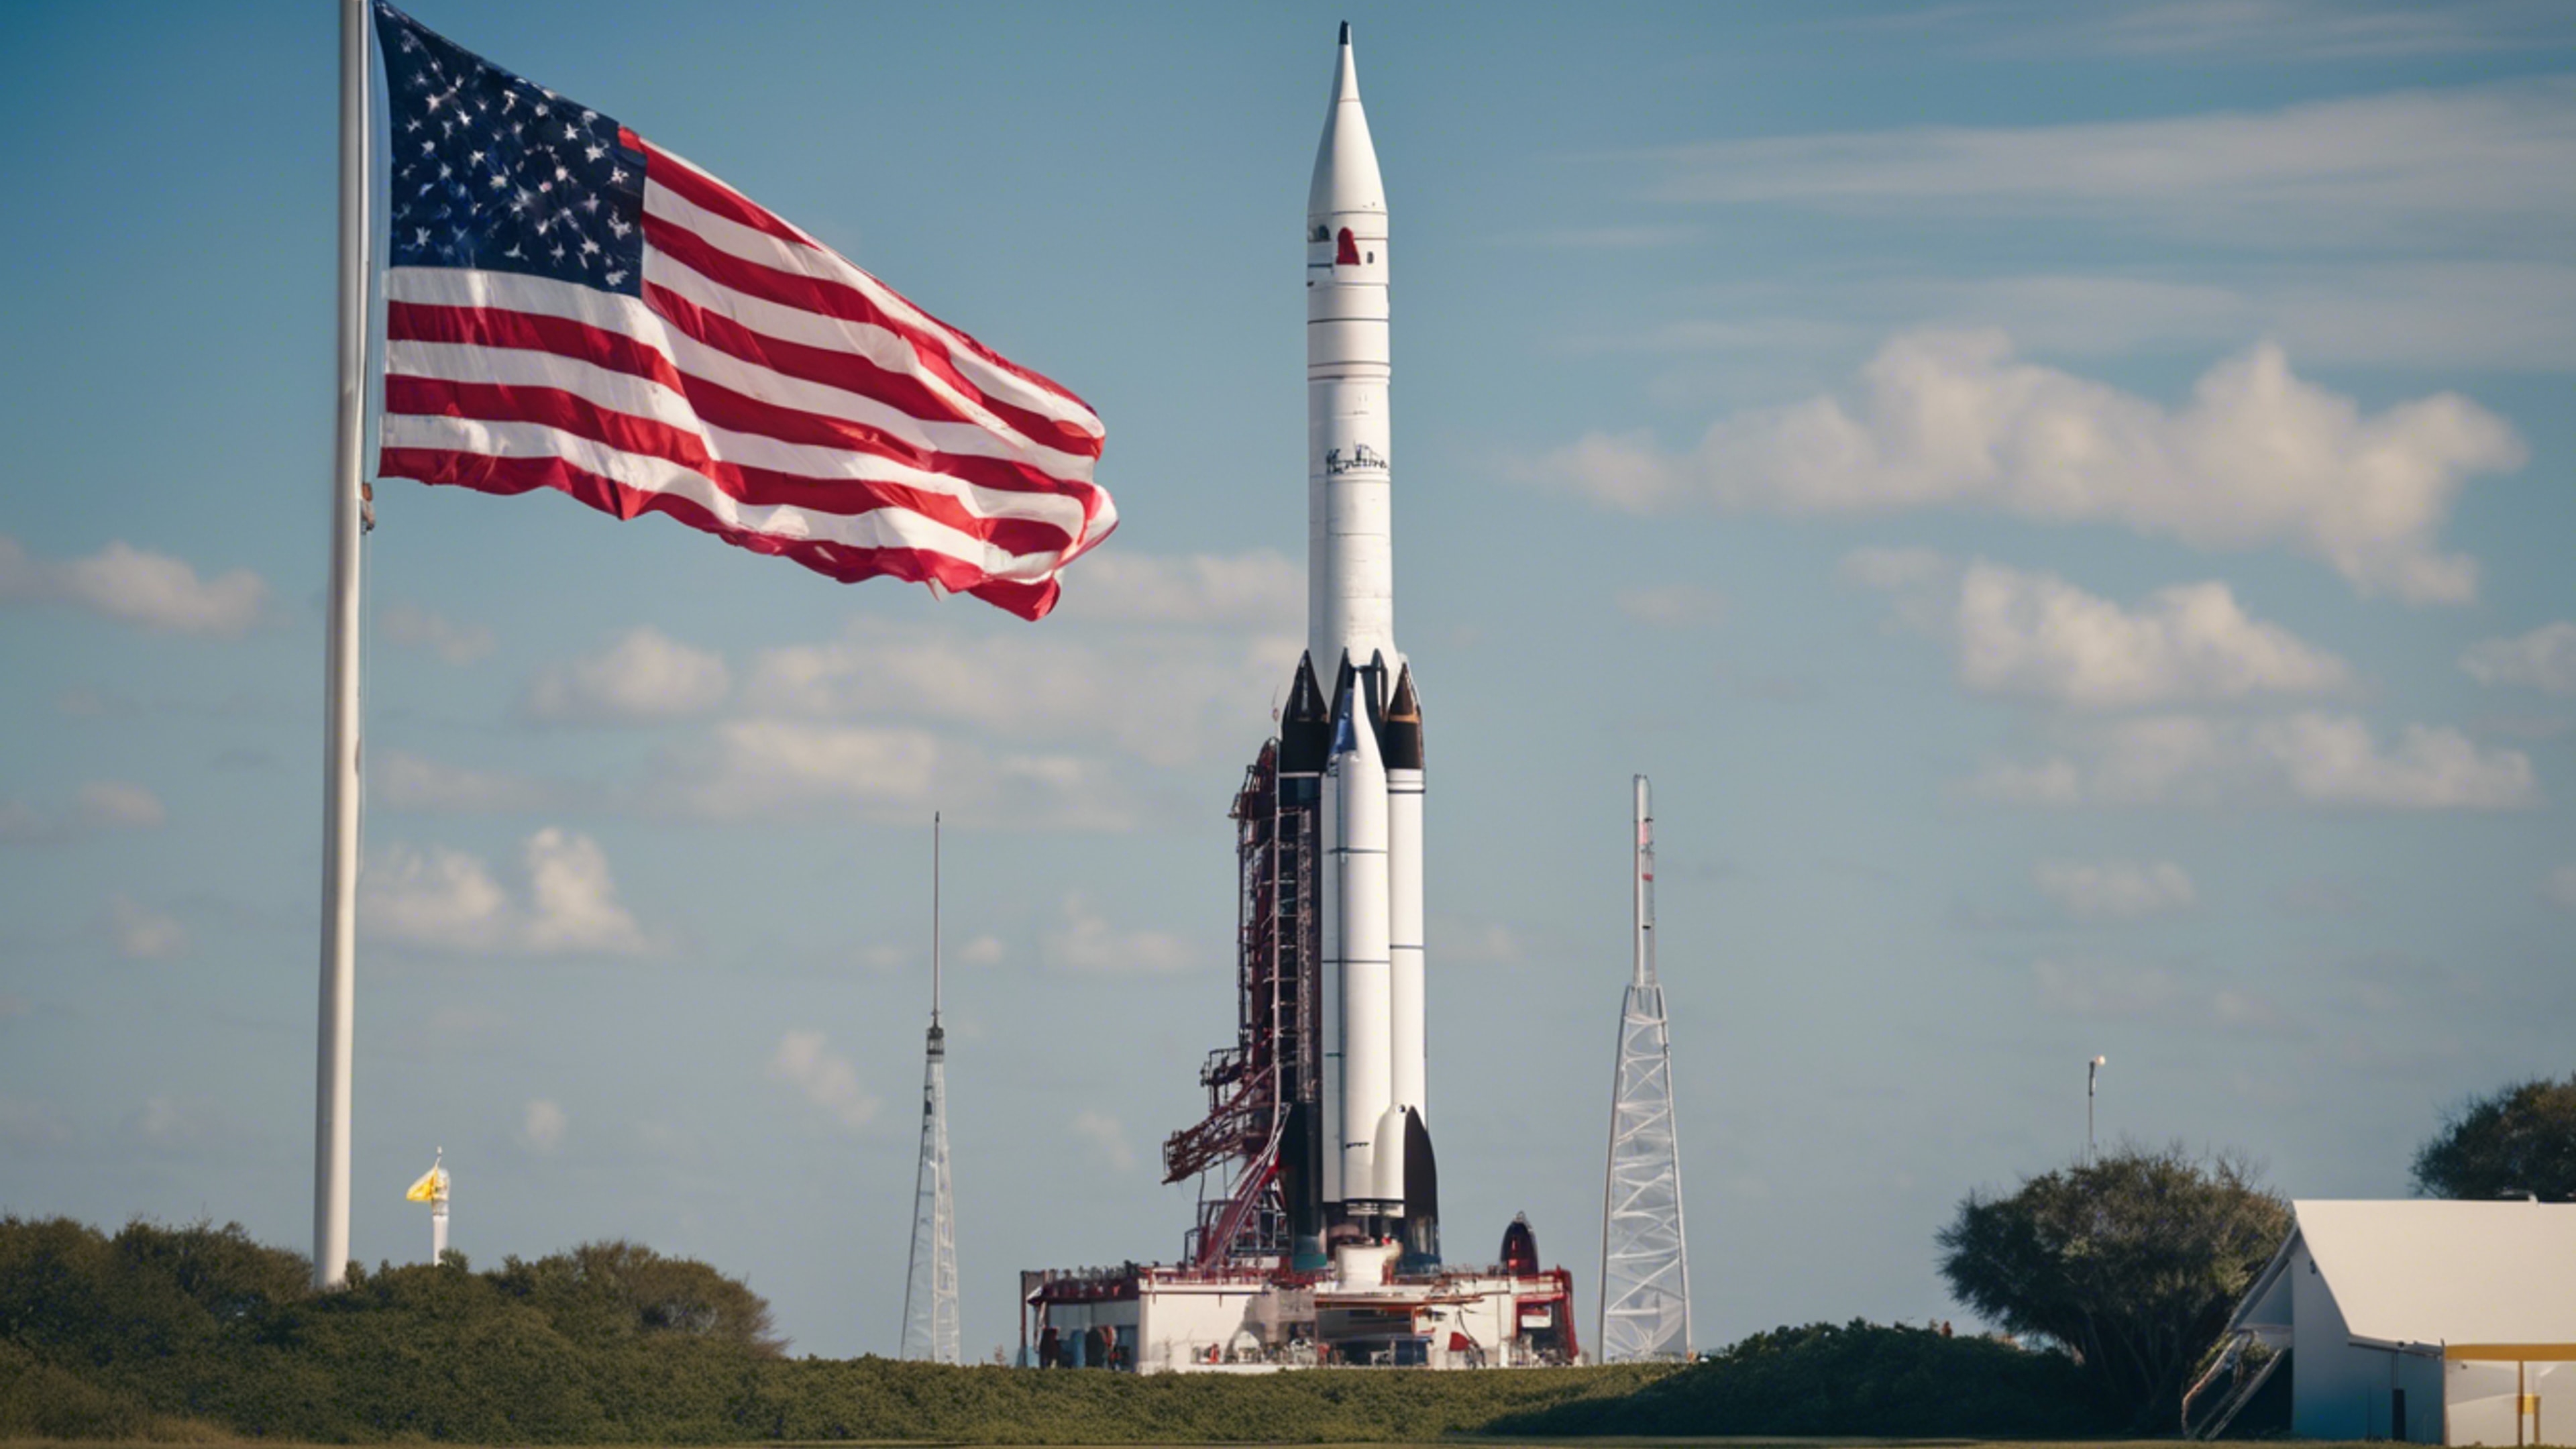 A historic rocket display at Cape Canaveral, with a clear blue sky and the American flag waving in the background. Fondo de pantalla[7e3199d5ab33424fb953]